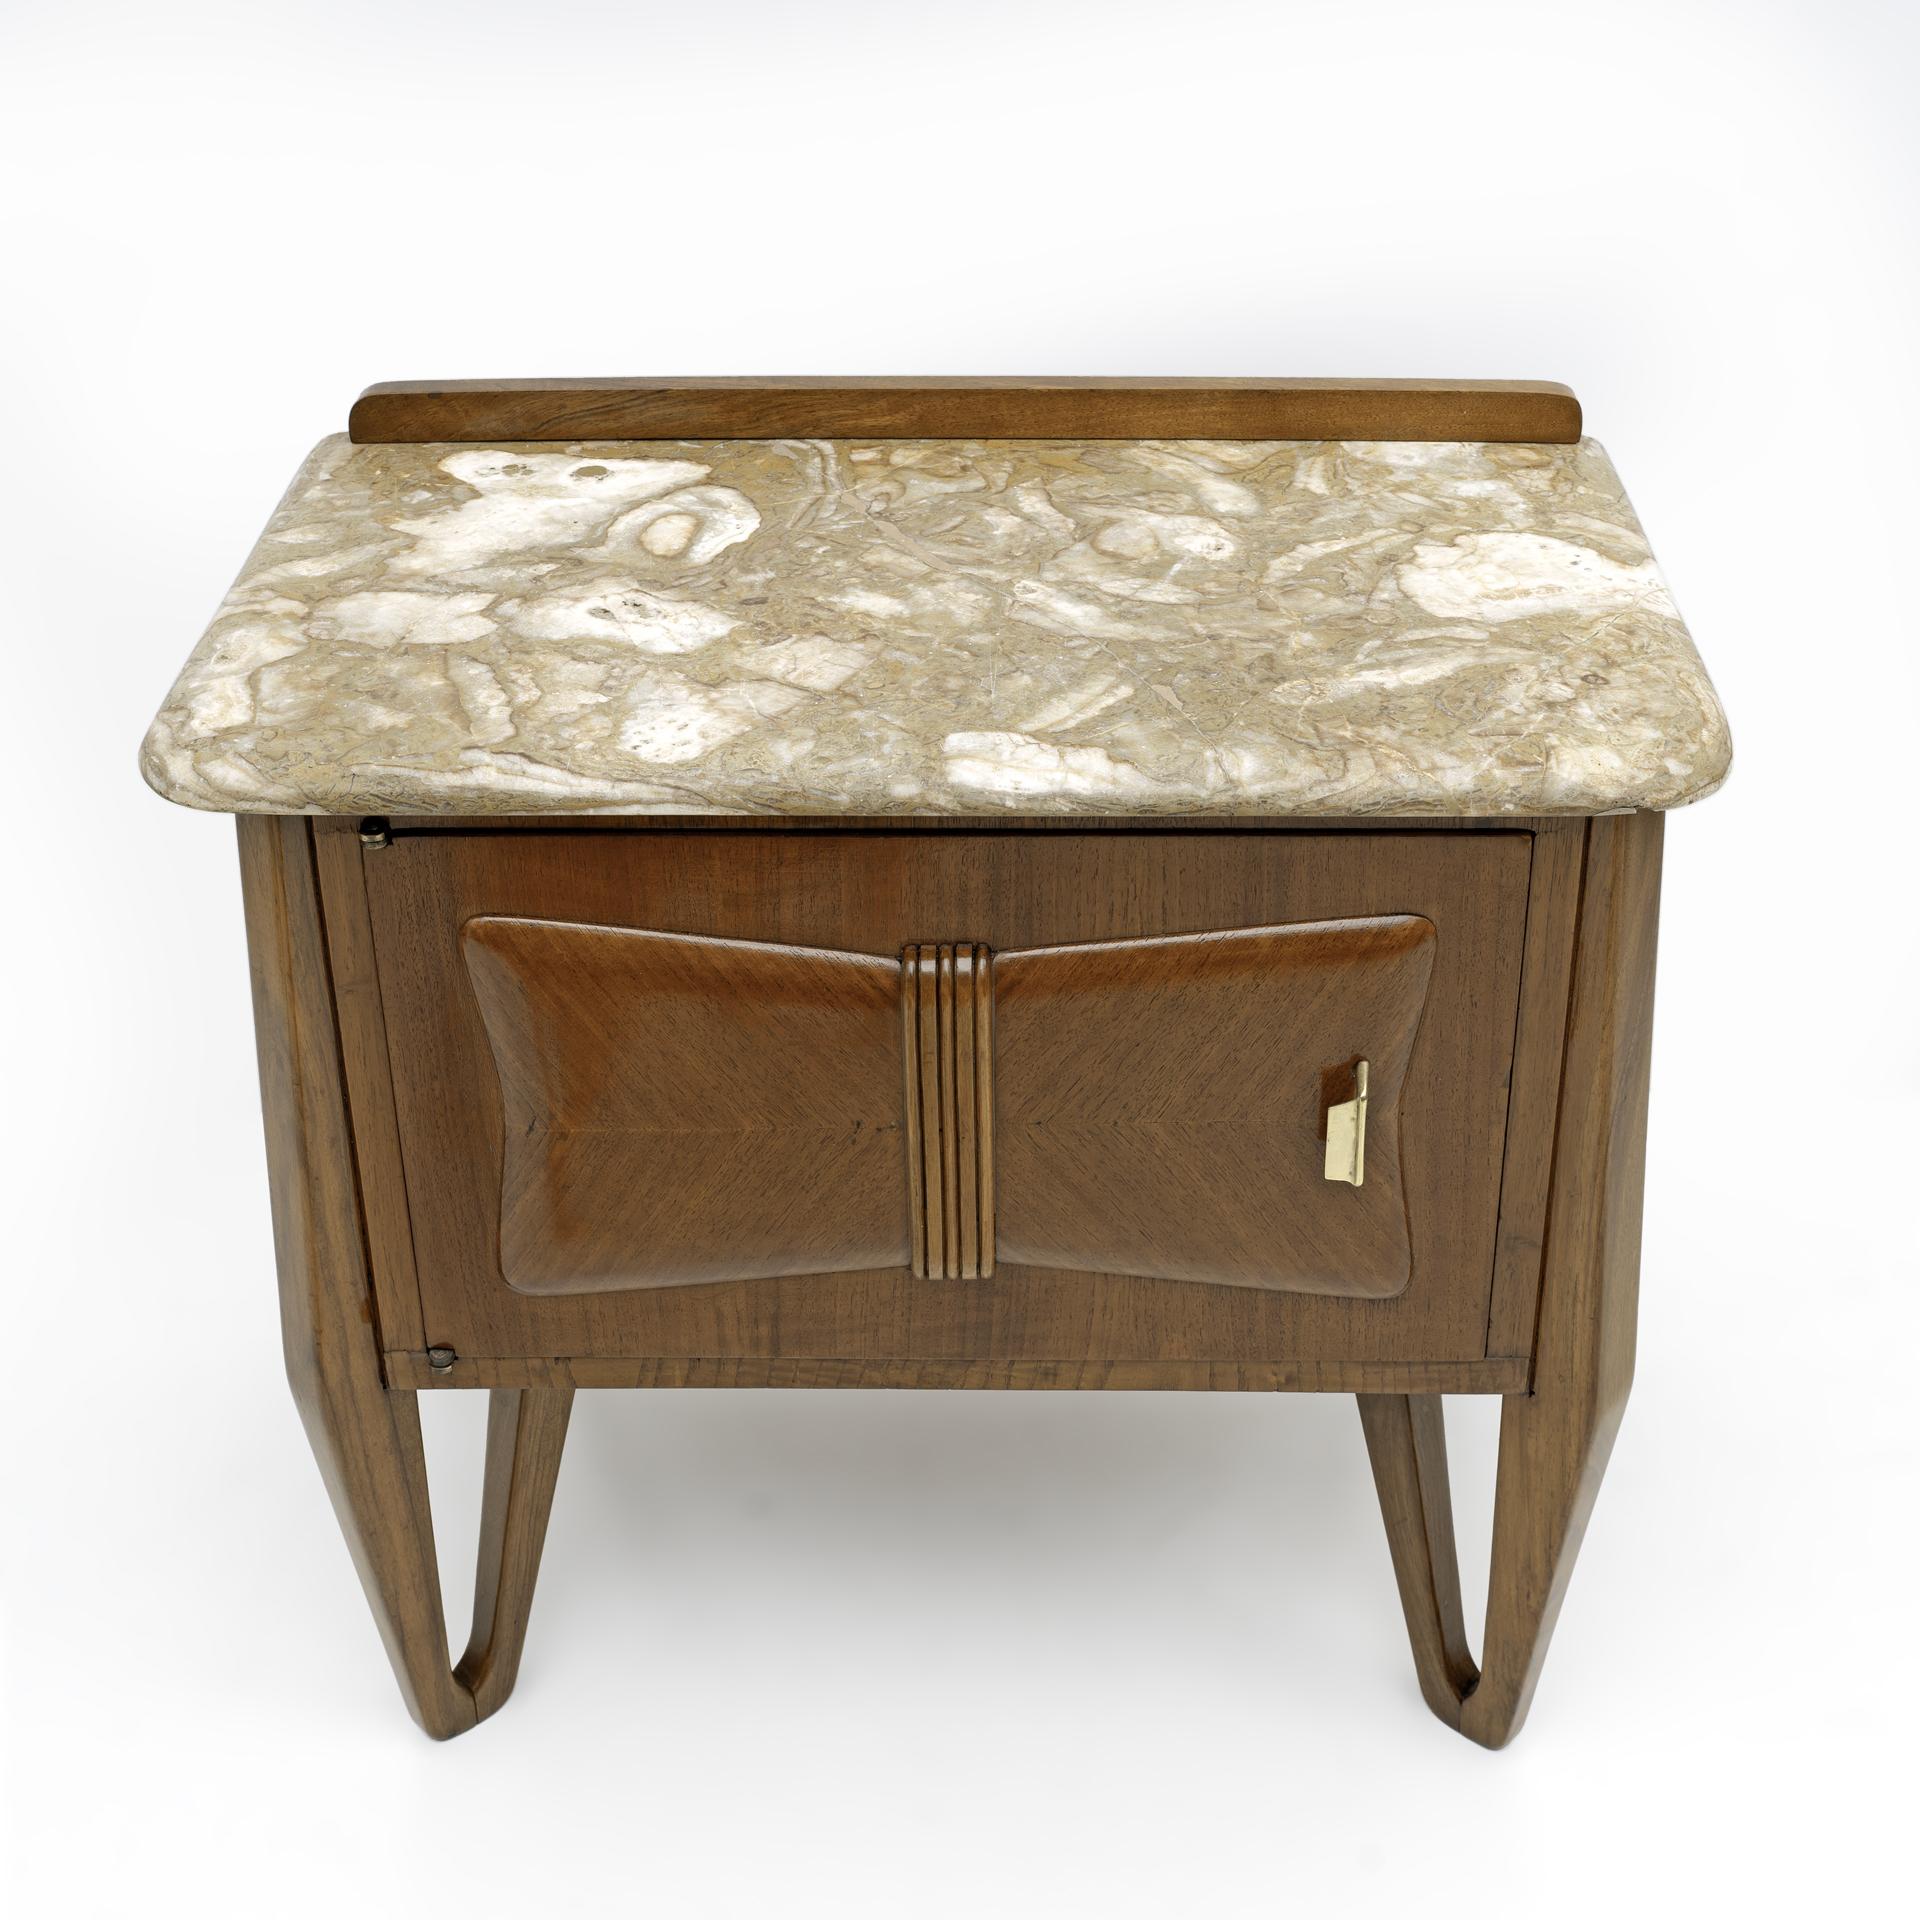 Pair of Italian bedside tables from the 1950s, in solid walnut with herringbone veneered doors and ocher marble top. They have been completely restored and shellac polished. The marble tops have also undergone restoration, gluing and polishing